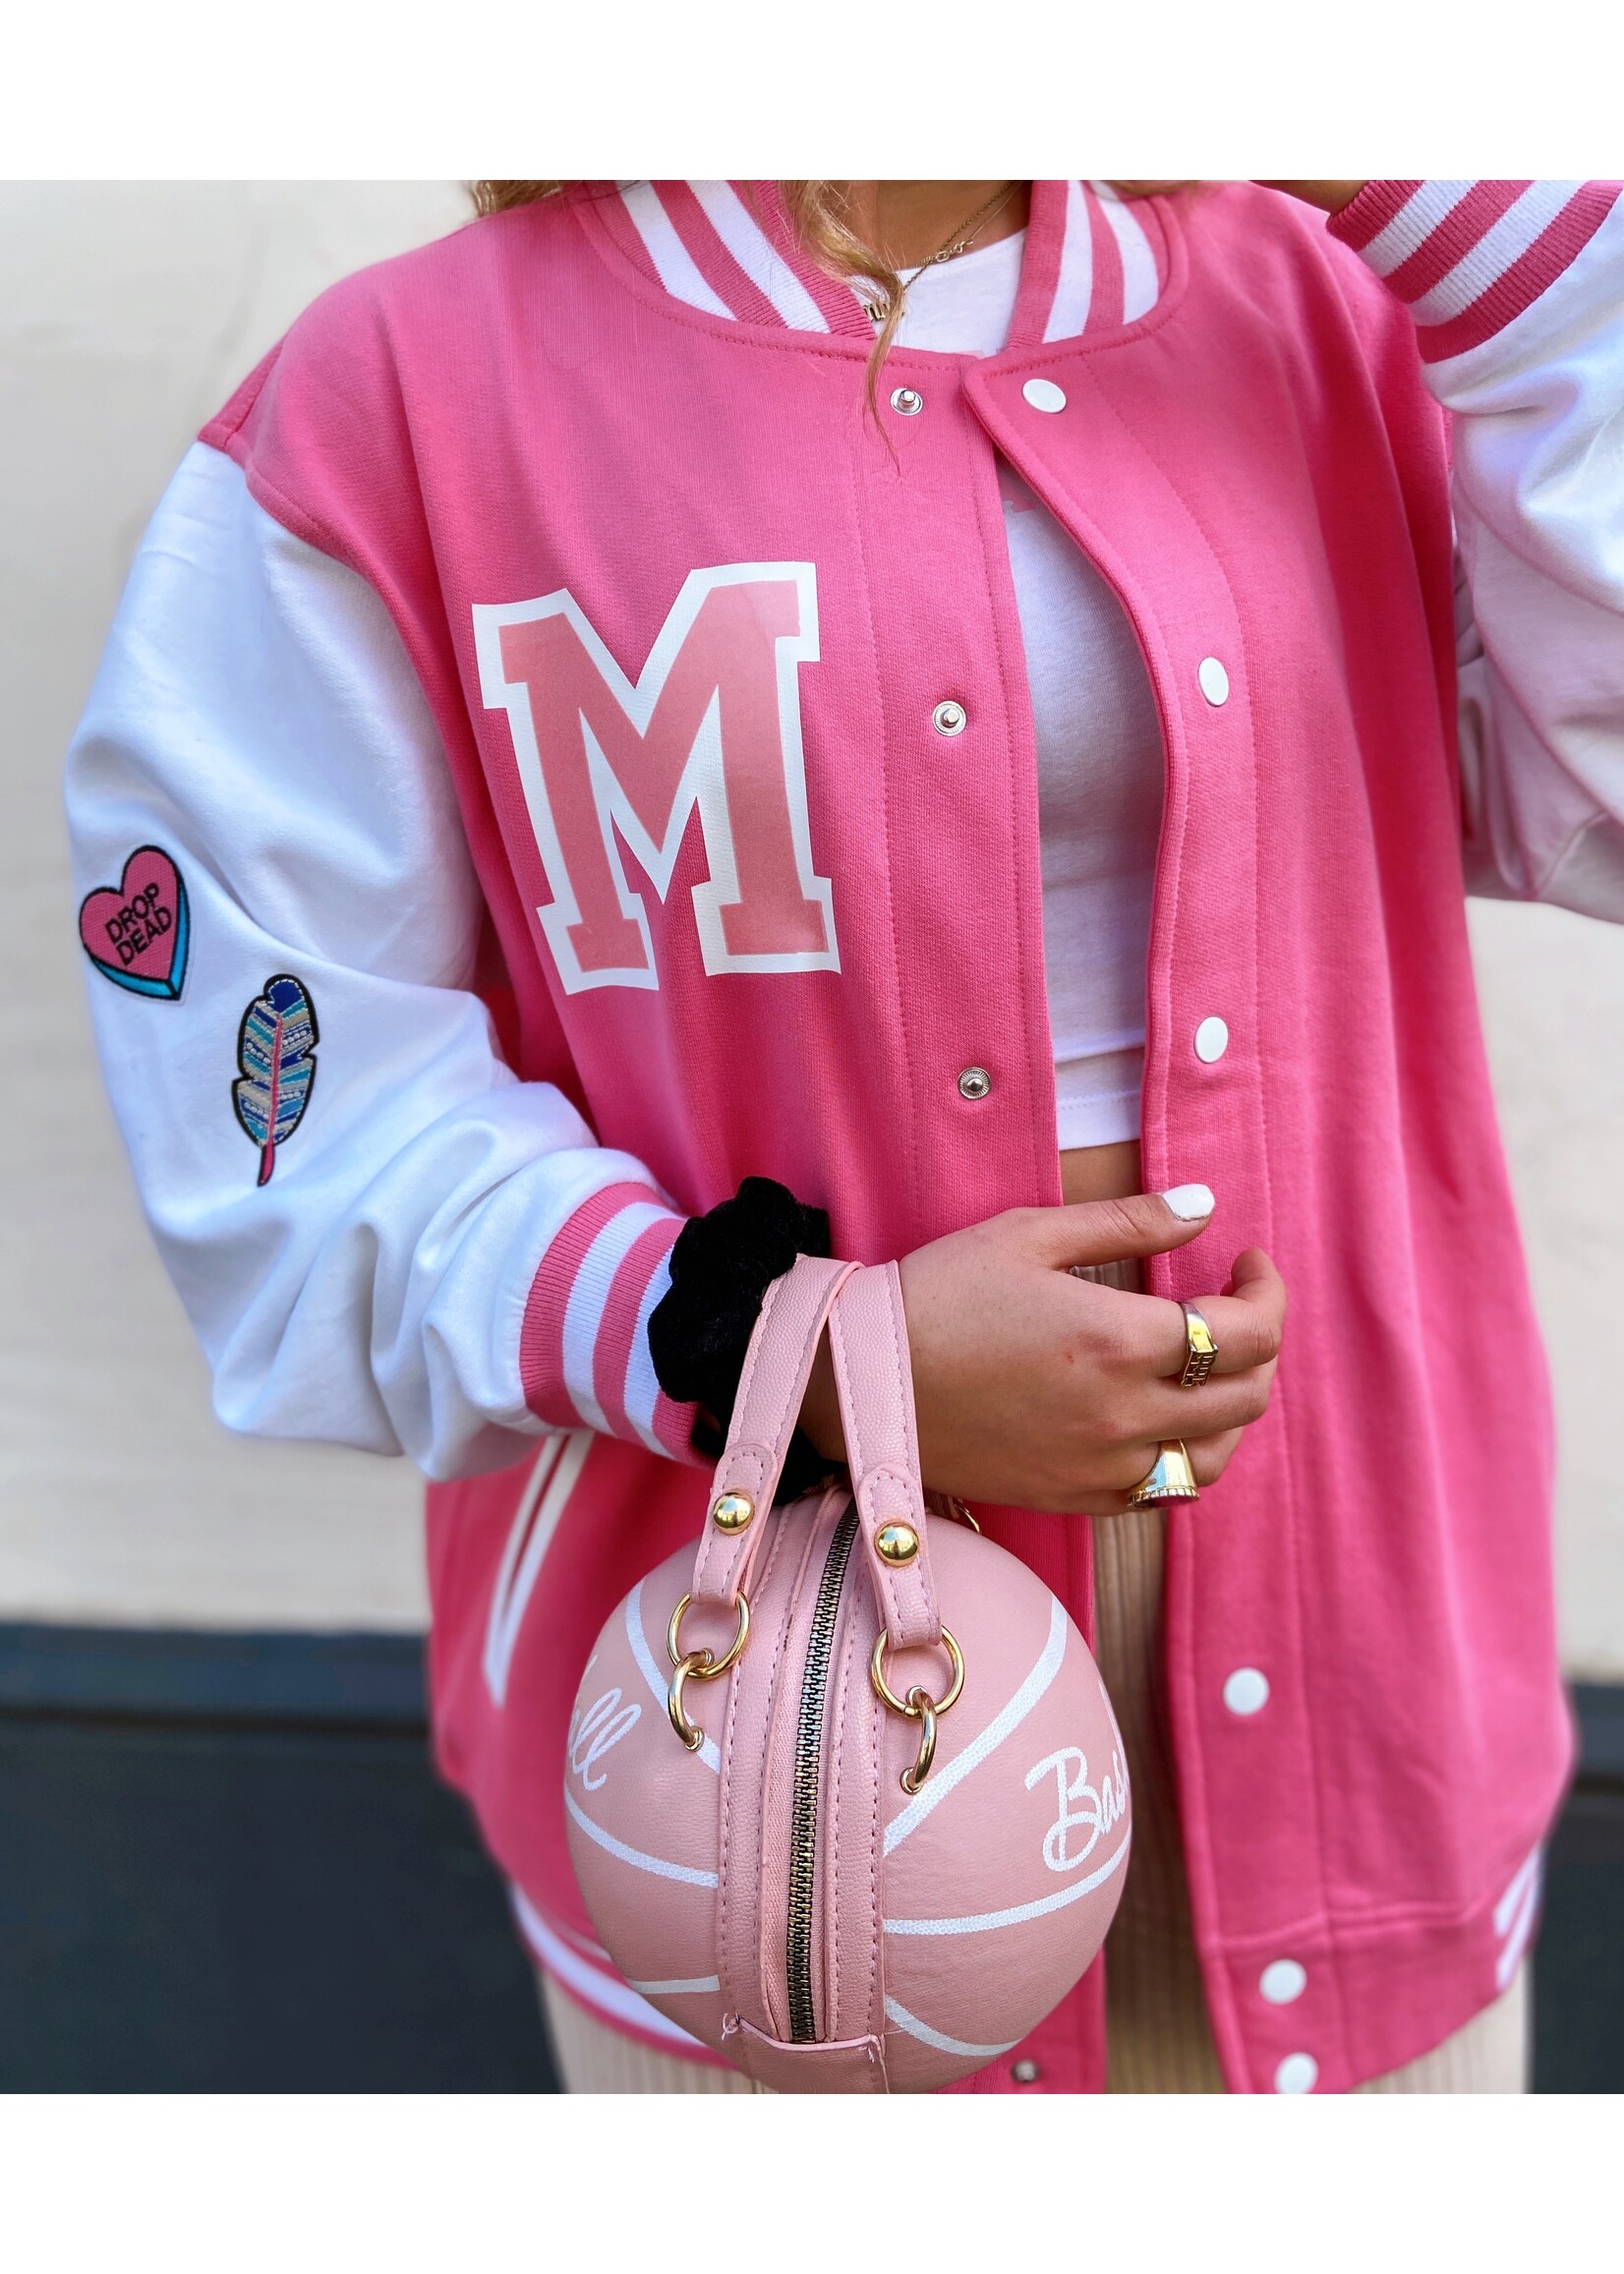 YOU ARE SPECIAL "No Time For Bullshit" Pink Baseball Jacket